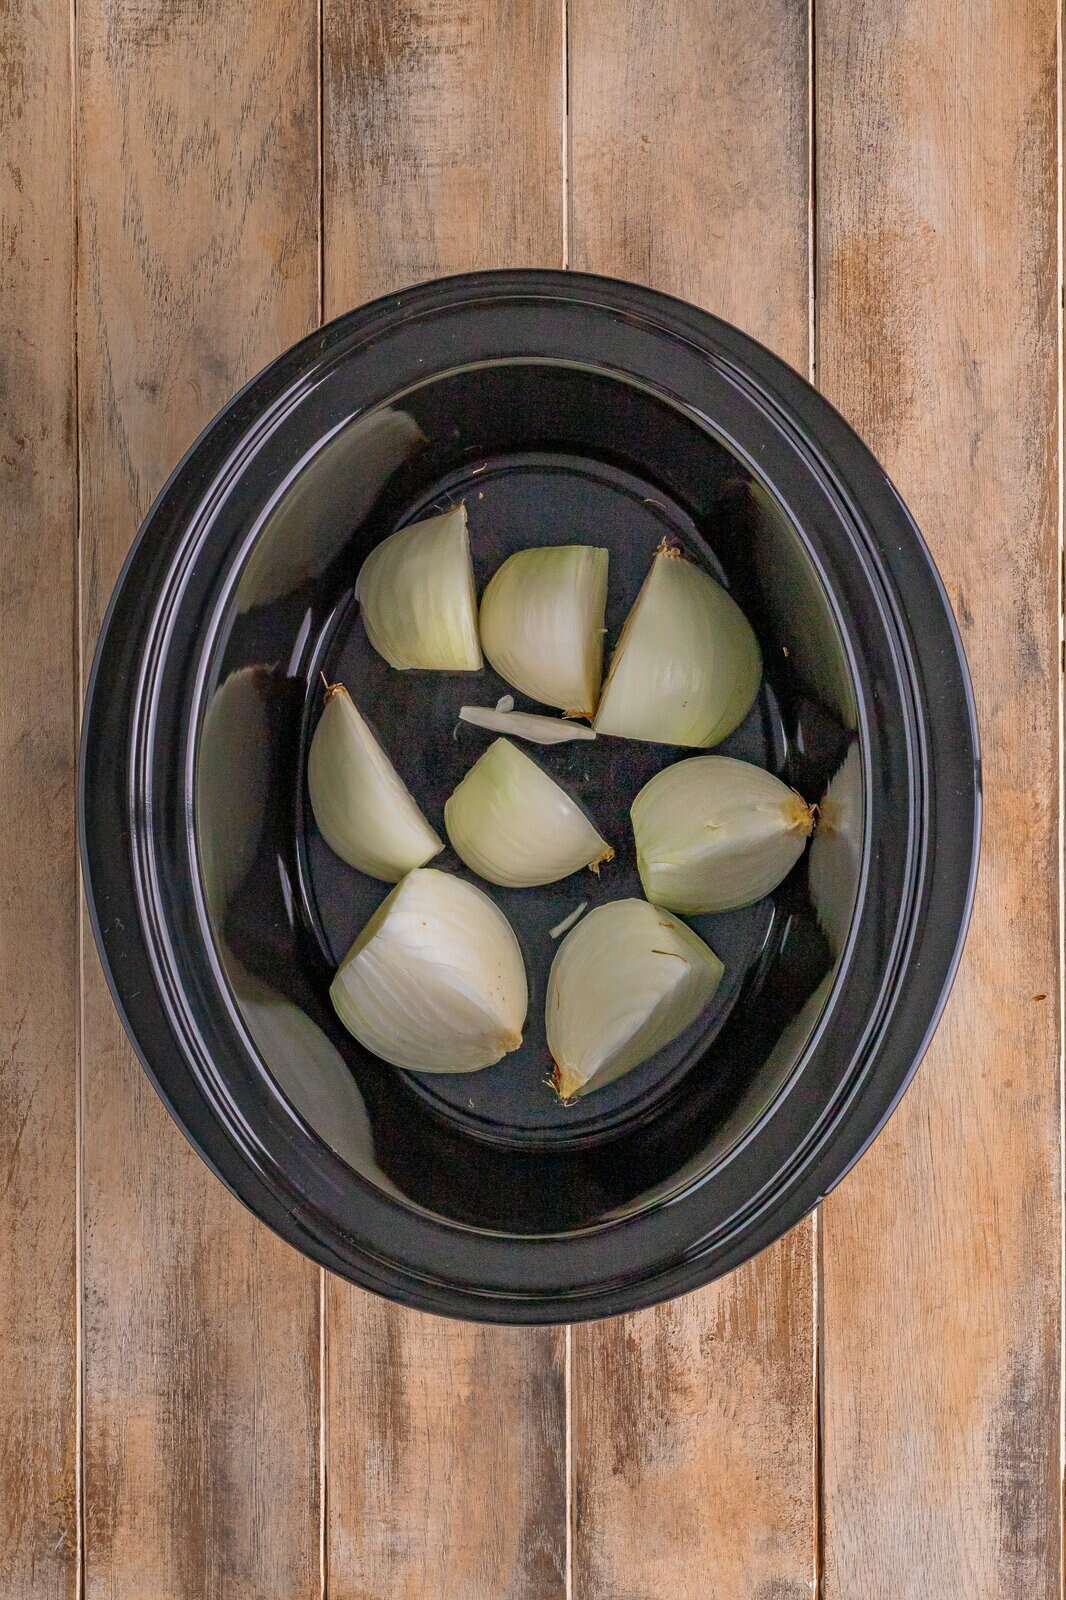 Onions placed in the bottom of a crock pot.